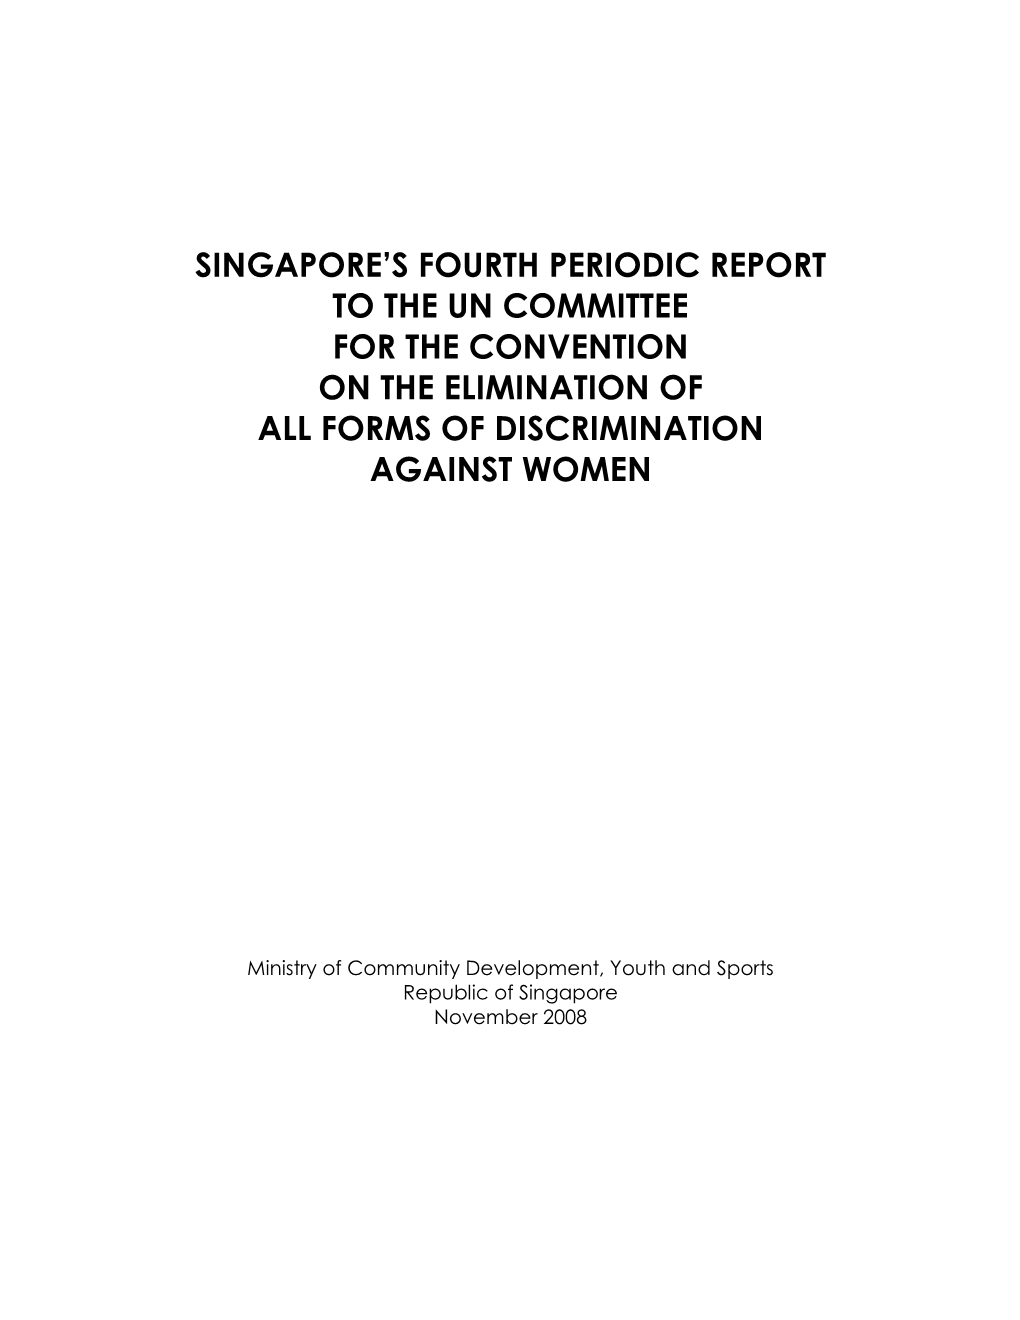 Singapore's Fourth Periodic Report to the Un Committee for the Convention on the Elimination of All Forms of Discrimination